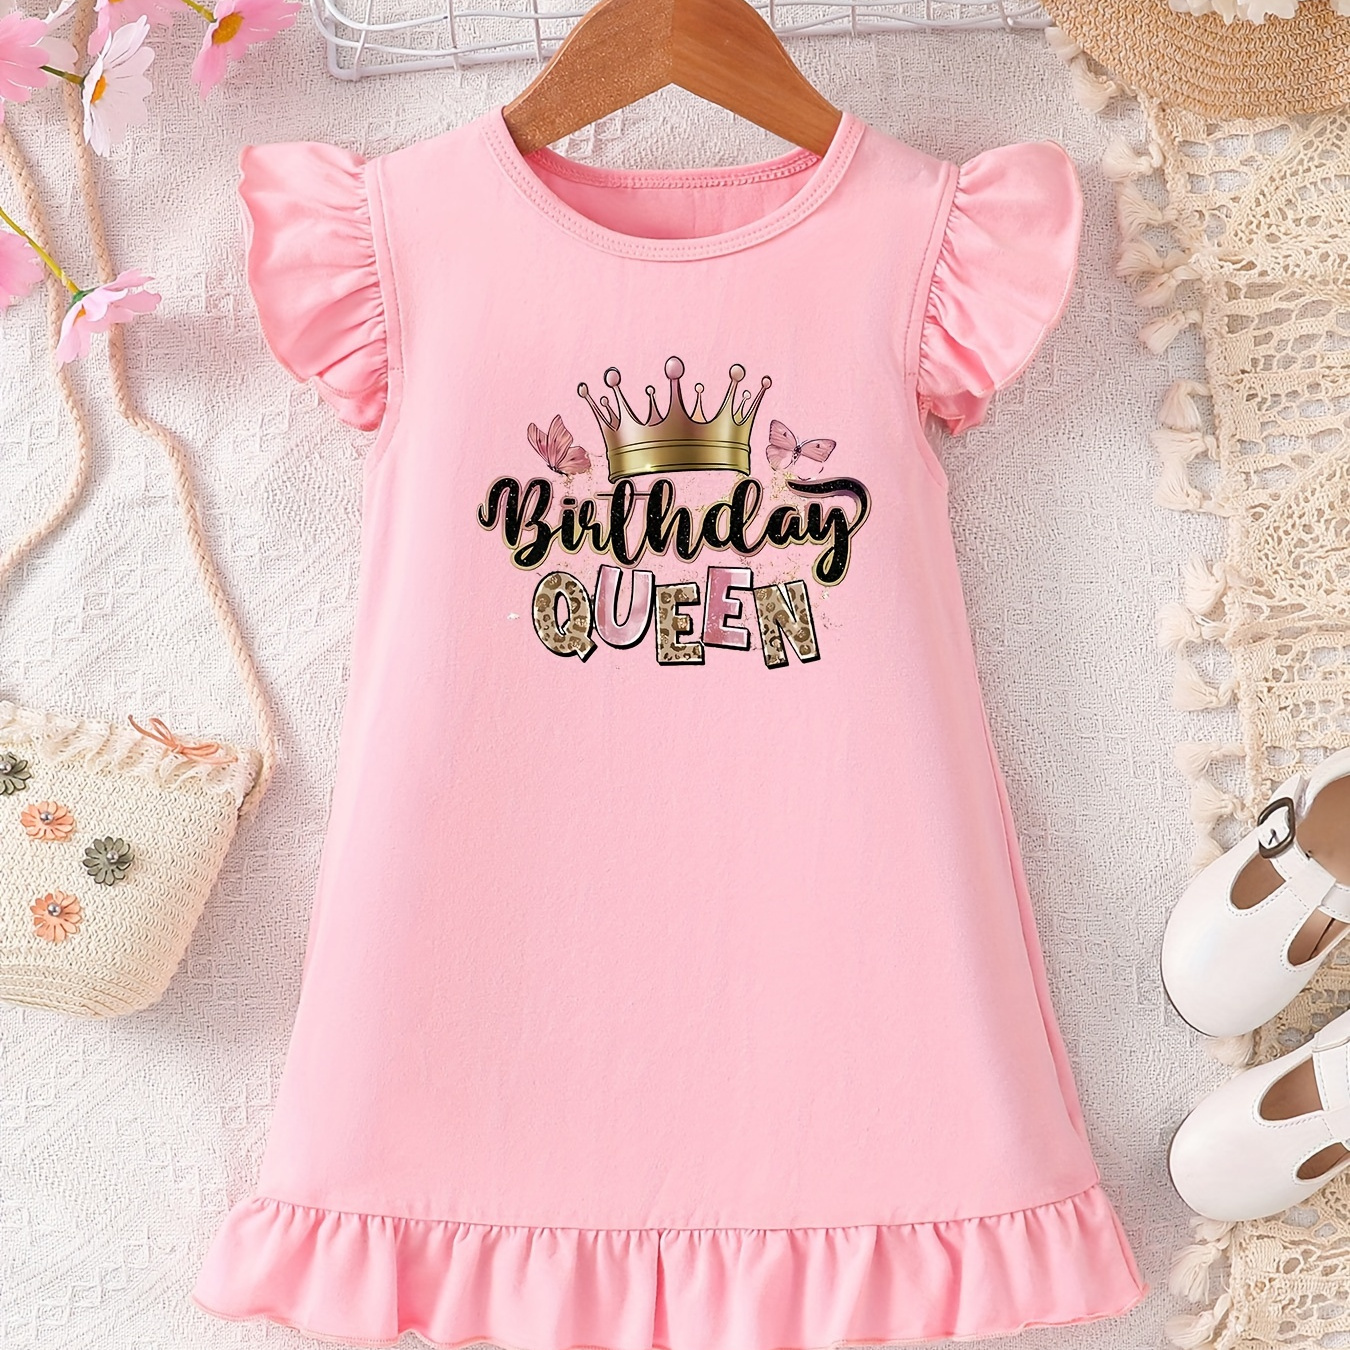 

Birthday Queen And Crown Graphic Print, Short Sleeve Crew Neck Ruffle Trim Cotton T-shirt Dress For Summer, Casual Clothing For Baby Girls, As Gifts